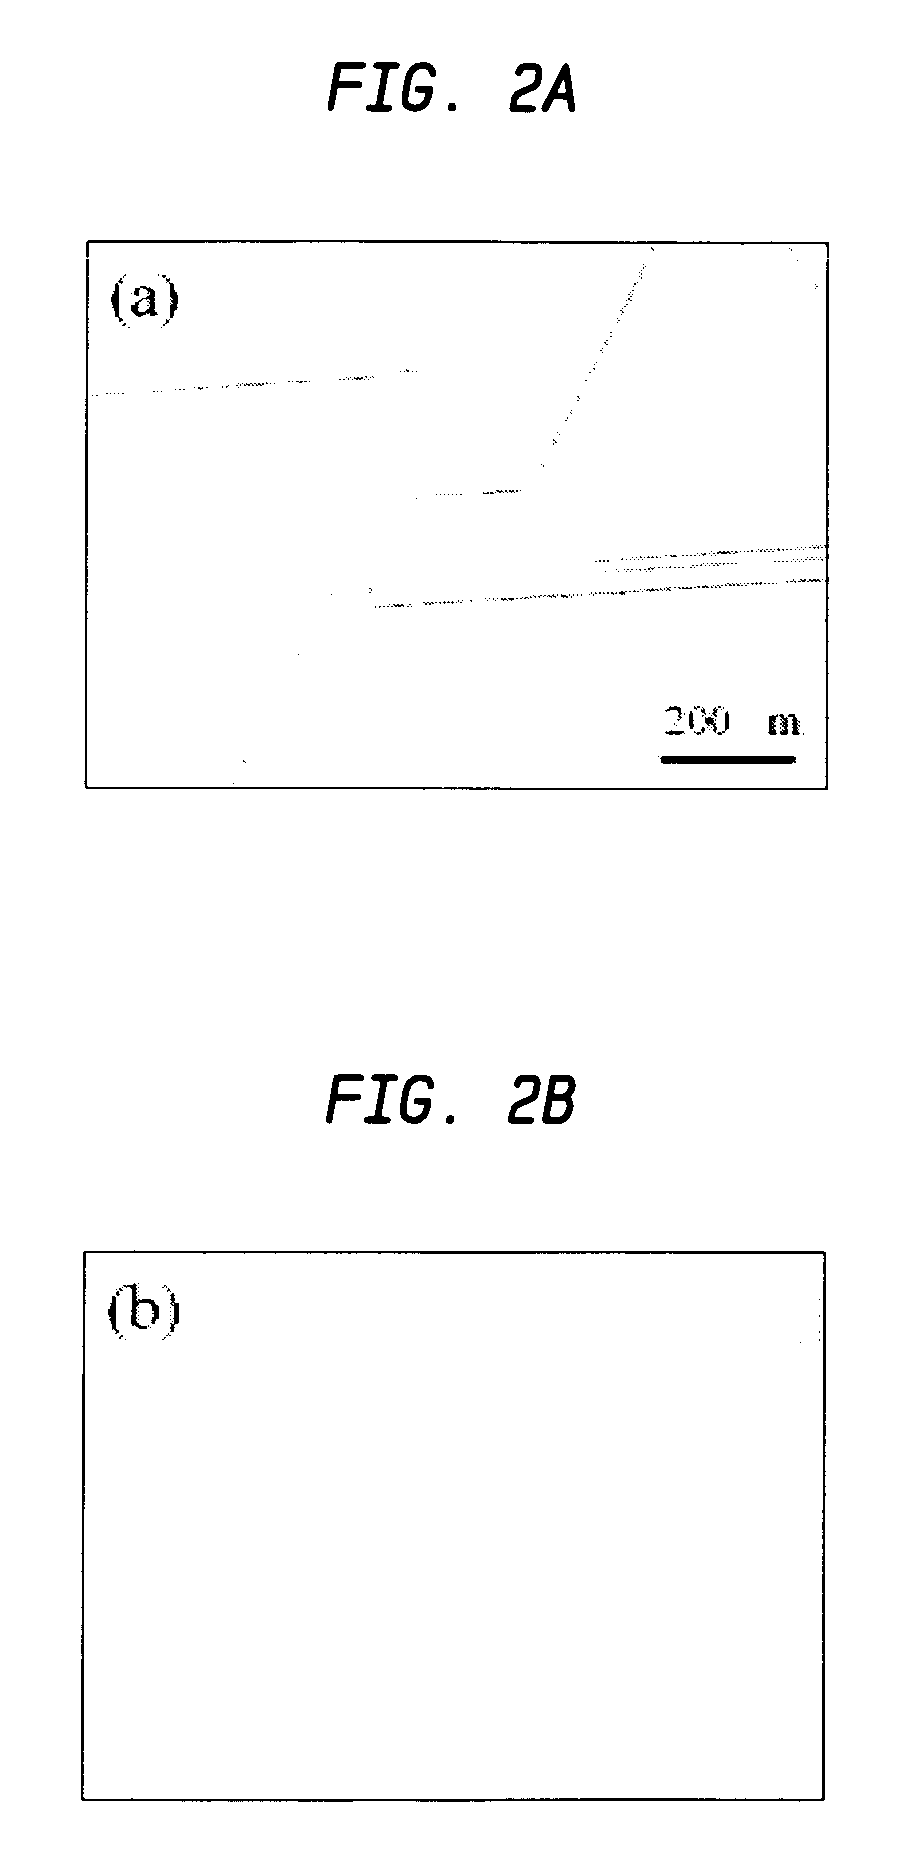 Gallium nitride-based devices and manufacturing process